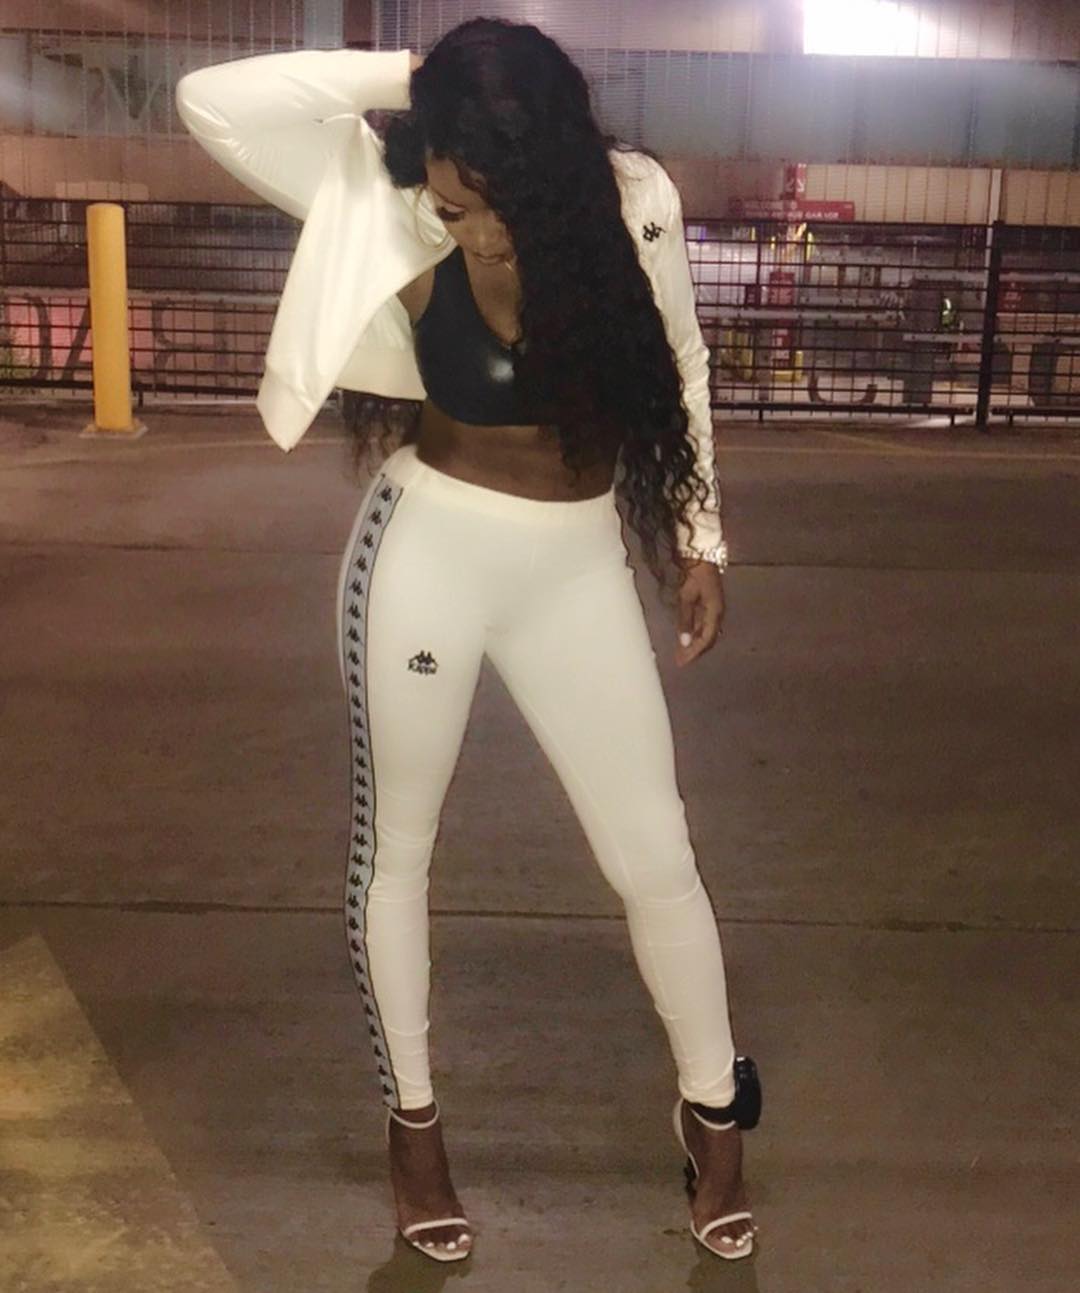 Remy Ma Poses For Pics While Wearing Ankle Monitor (2)